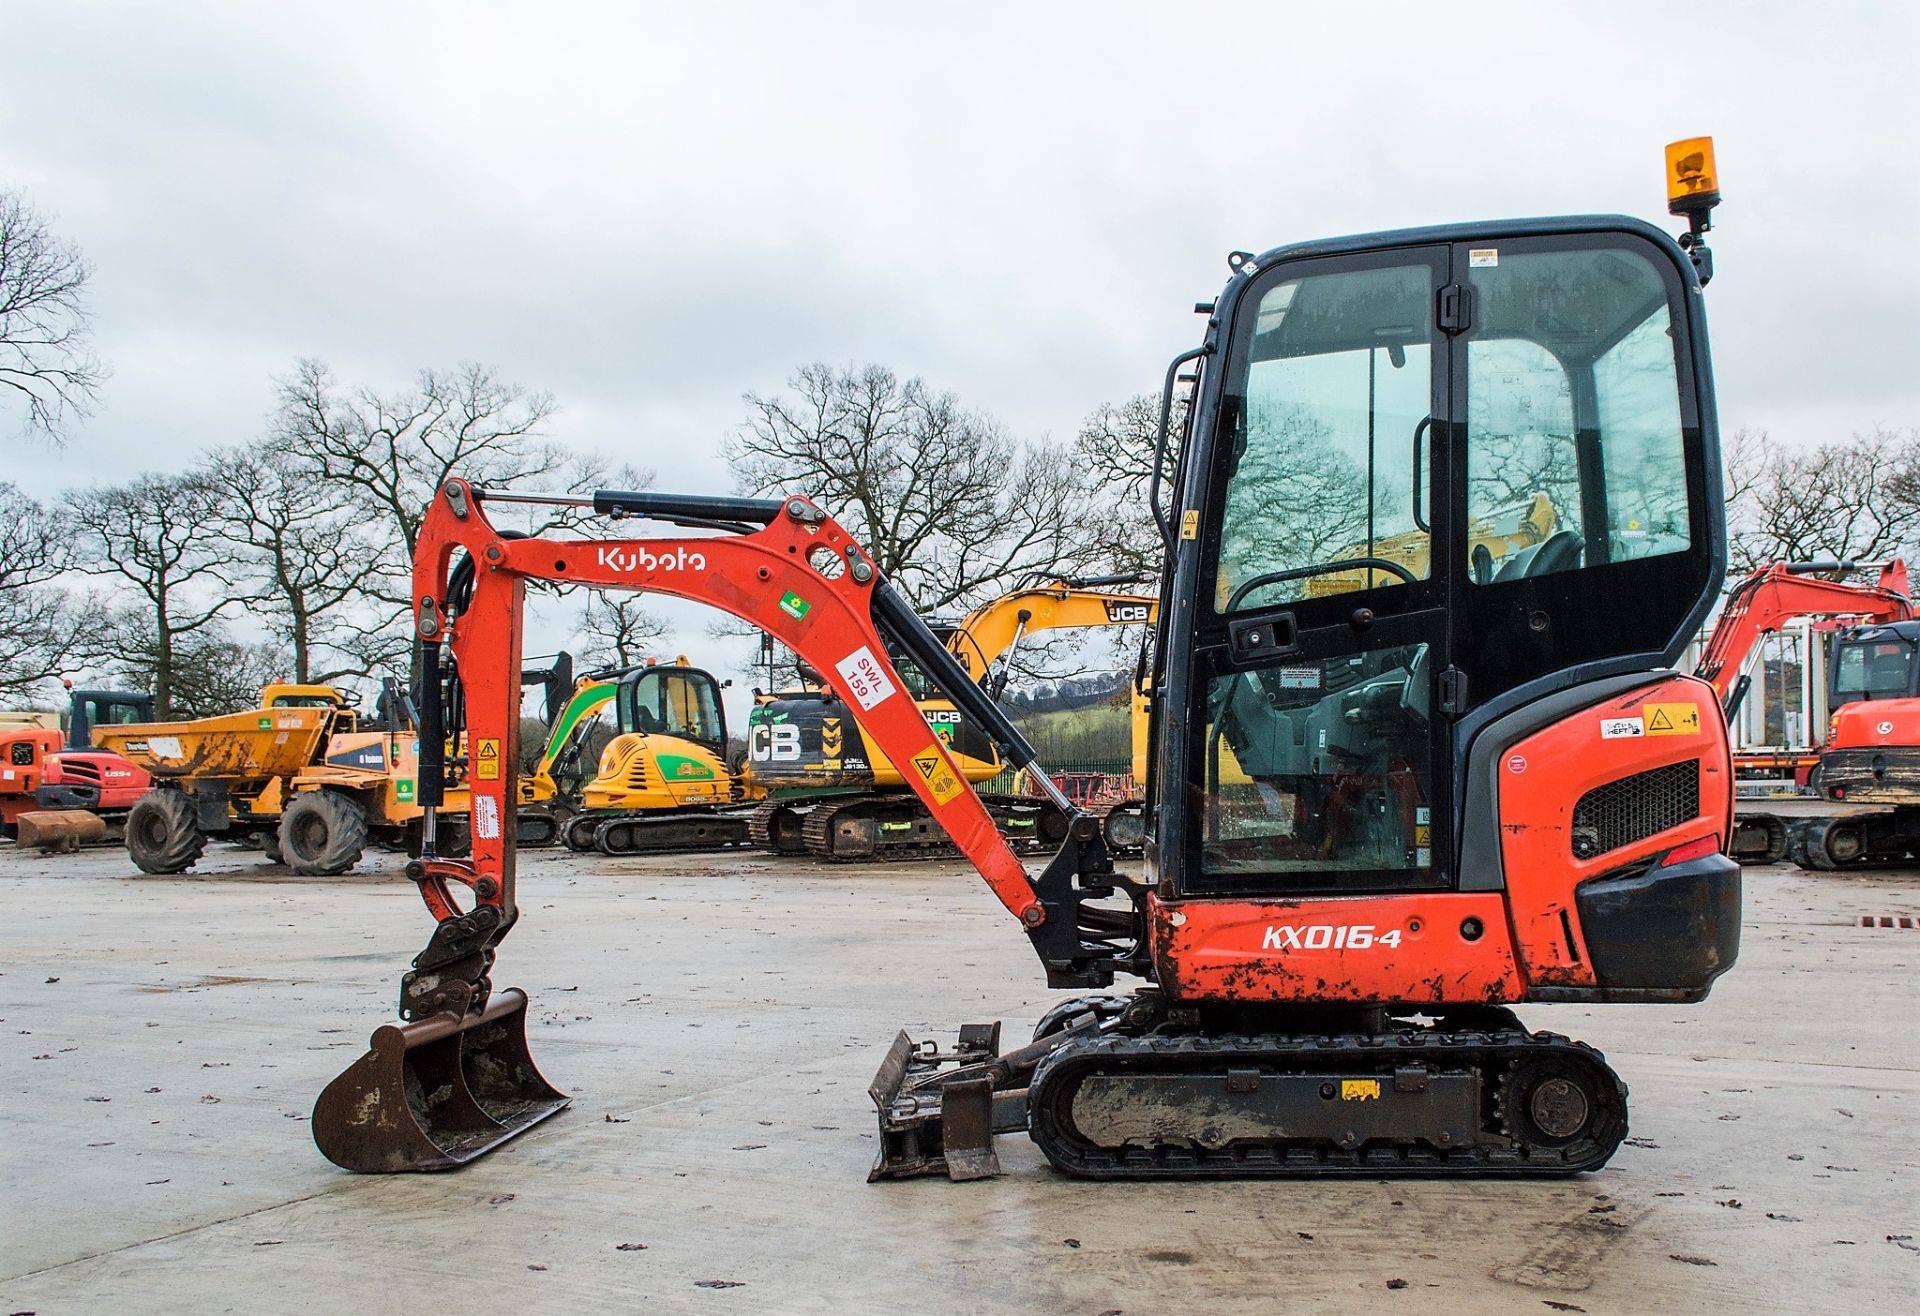 Kubota KX016-4 1.5 tonne rubber tracked excavator Year: 2014 S/N: 57529 Recorded Hours: 2638 - Image 7 of 23